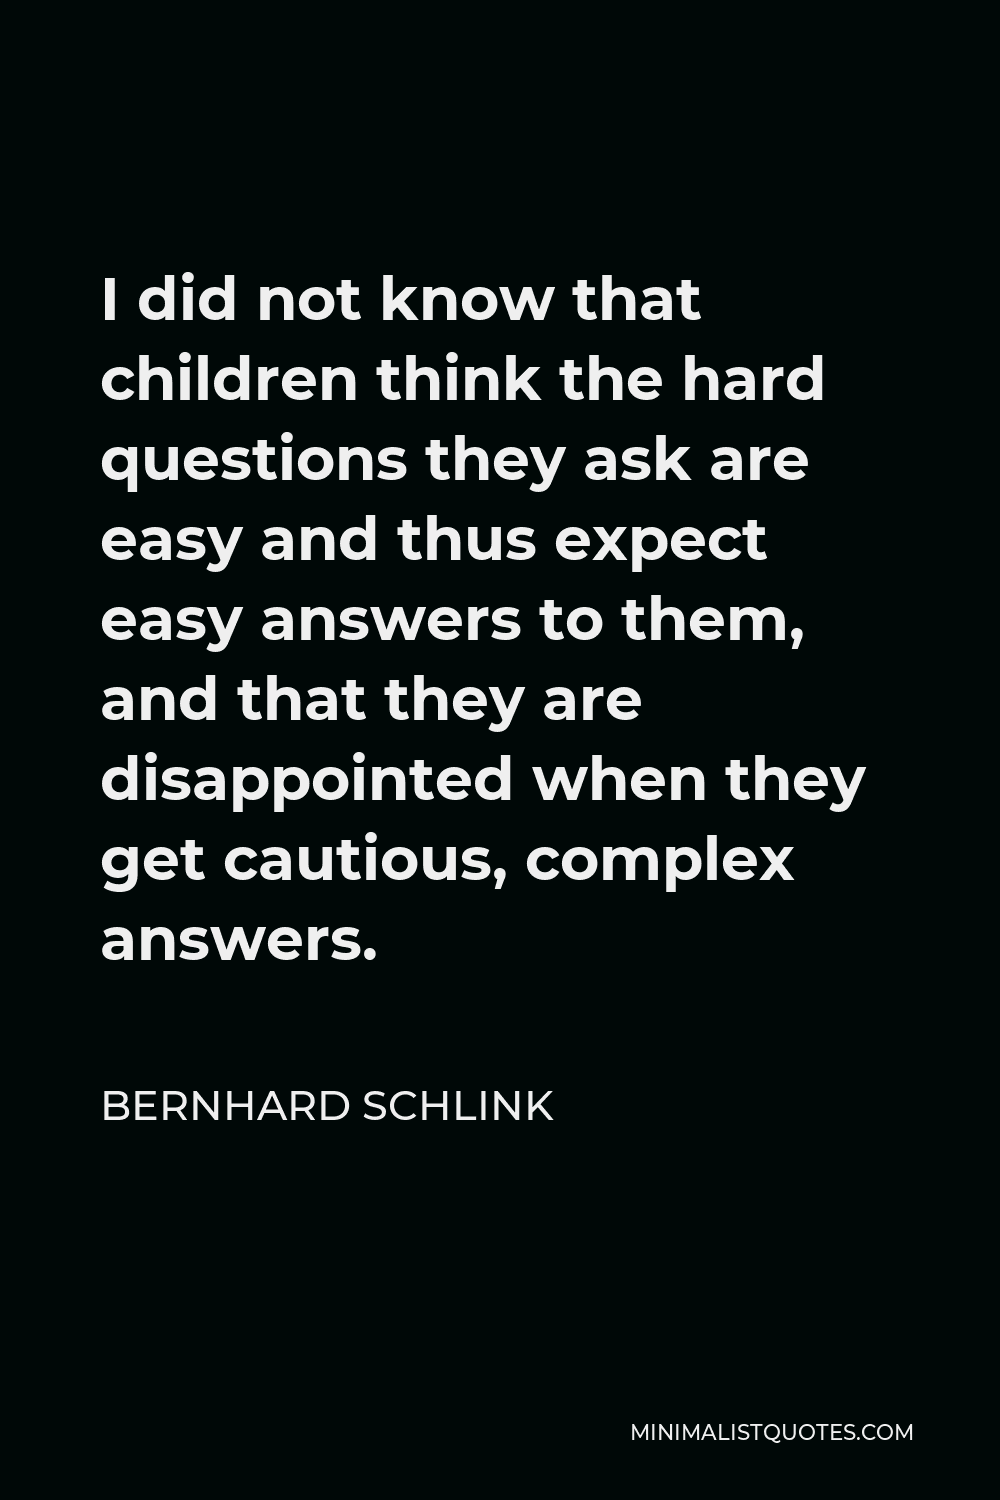 Bernhard Schlink Quote - I did not know that children think the hard questions they ask are easy and thus expect easy answers to them, and that they are disappointed when they get cautious, complex answers.